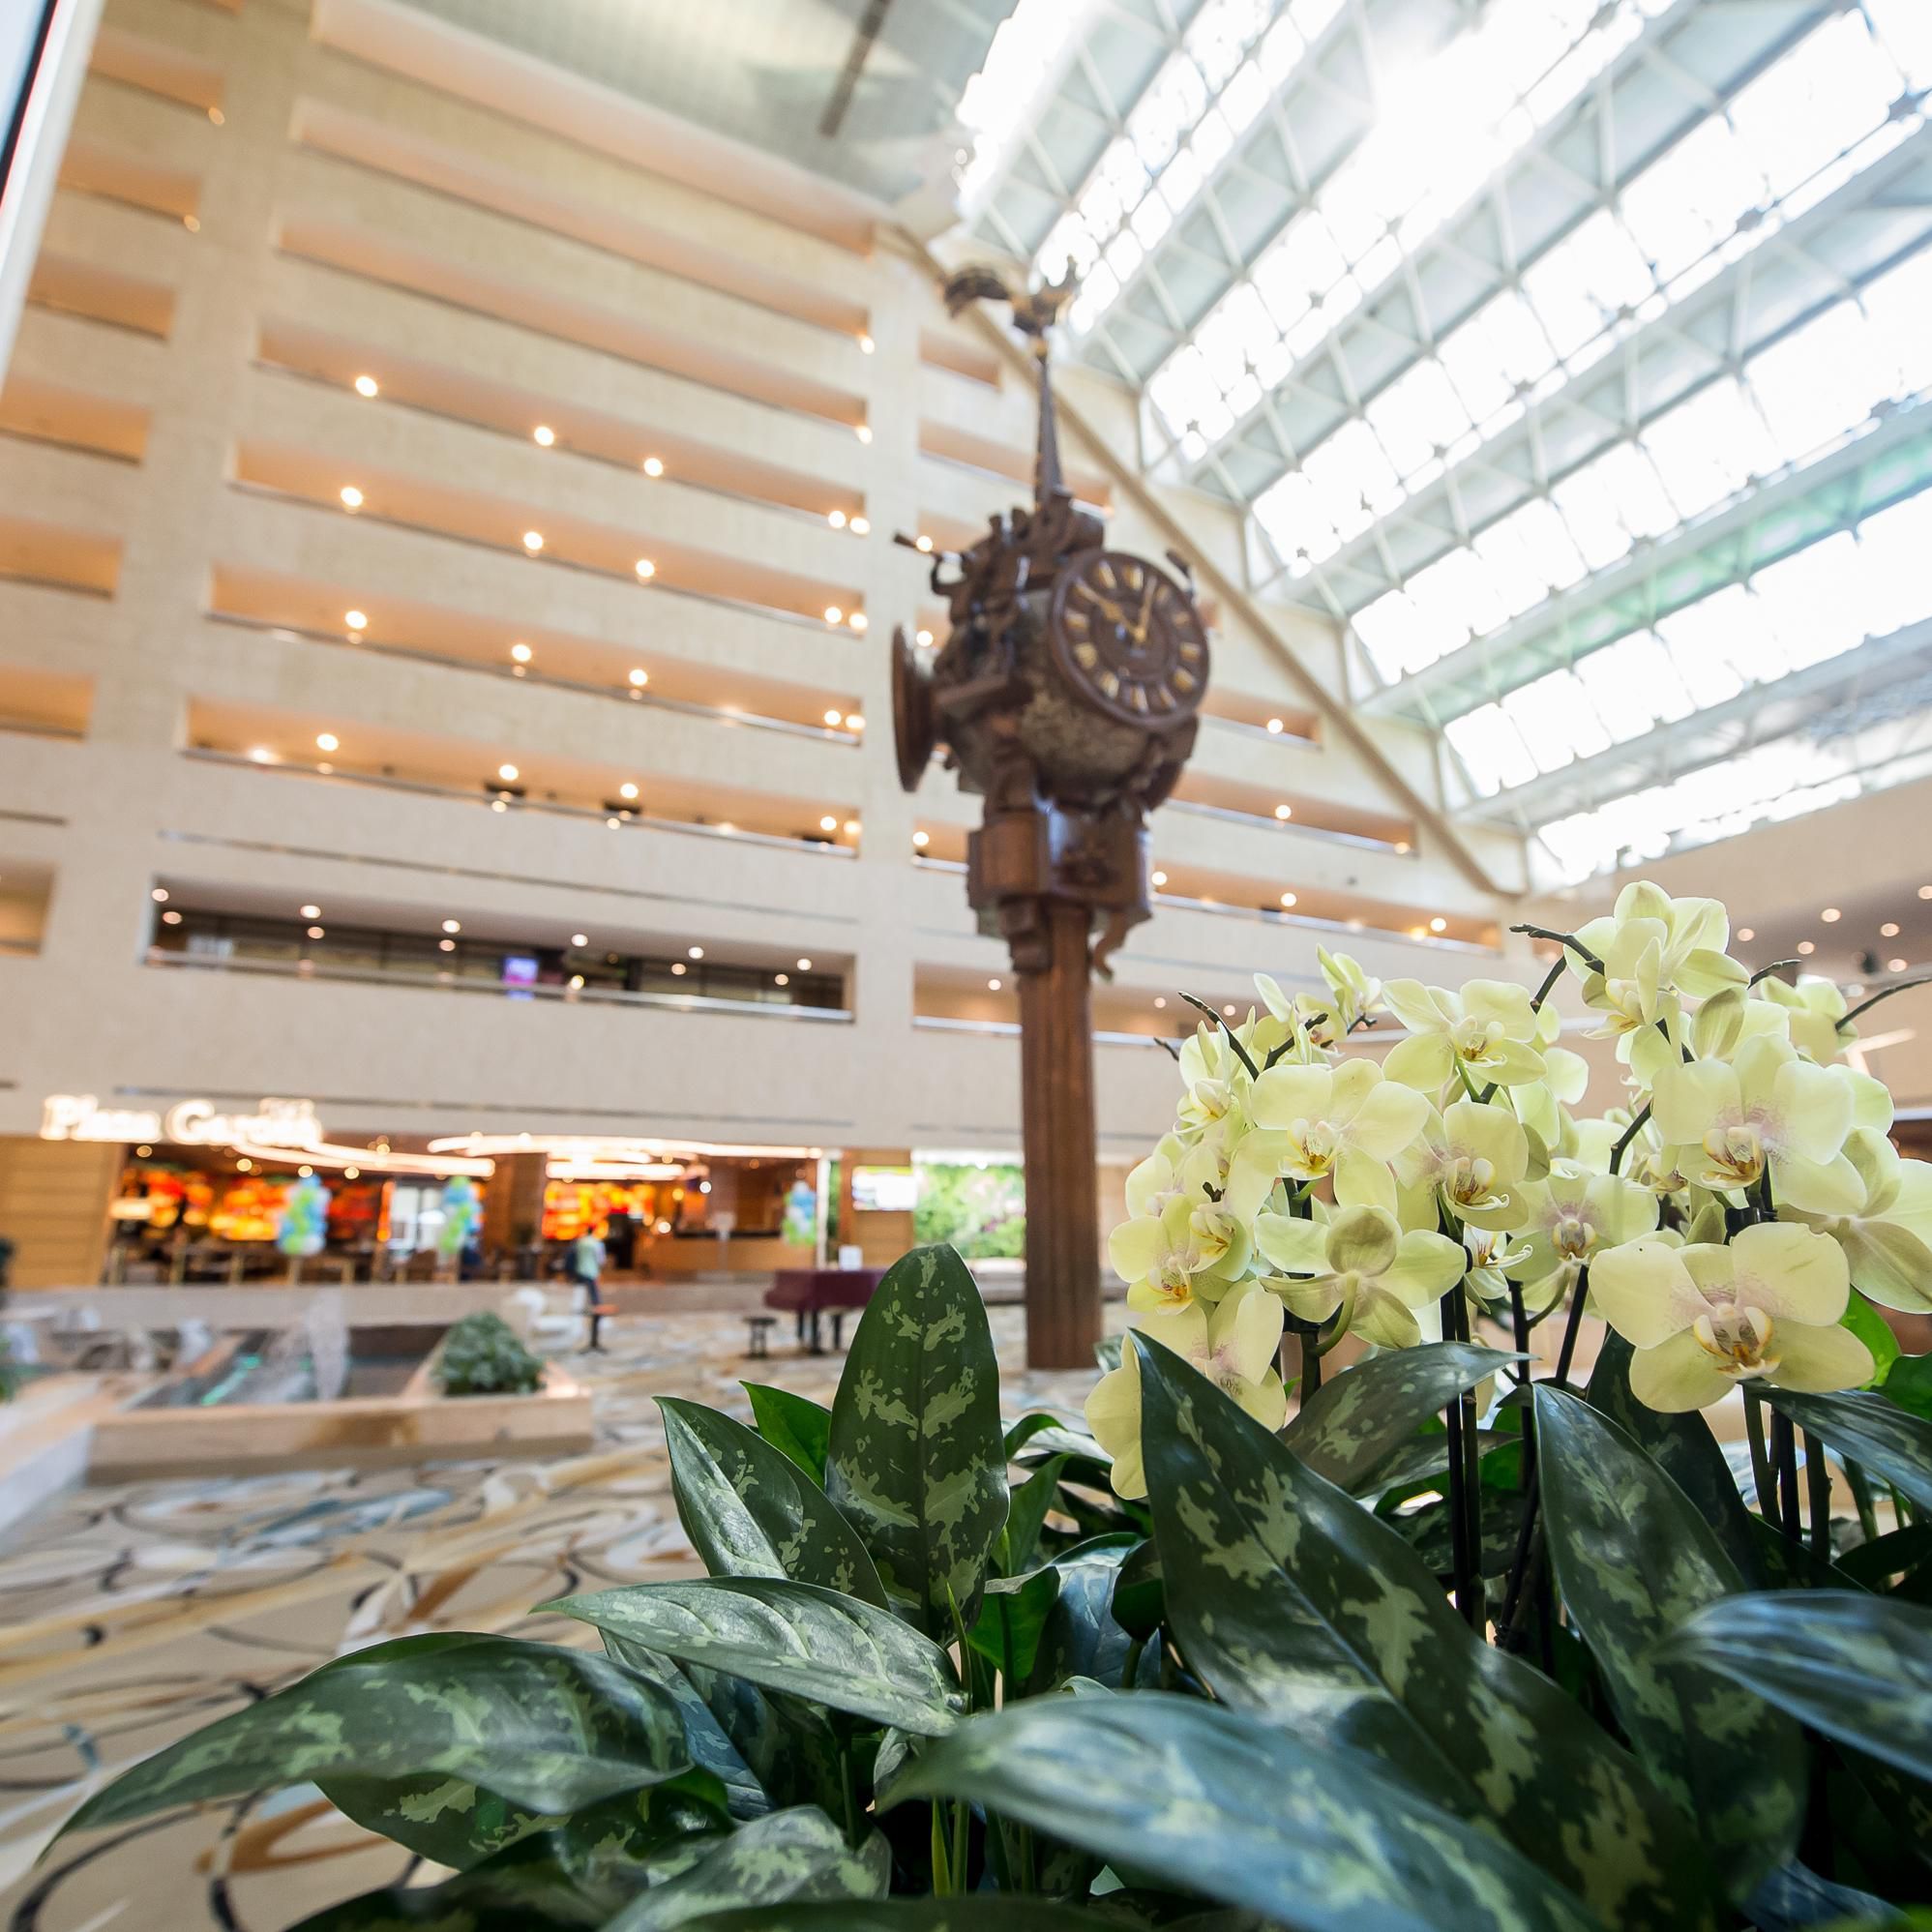 Signature clock in Hotel Atrium, lobby decorated with live flowers